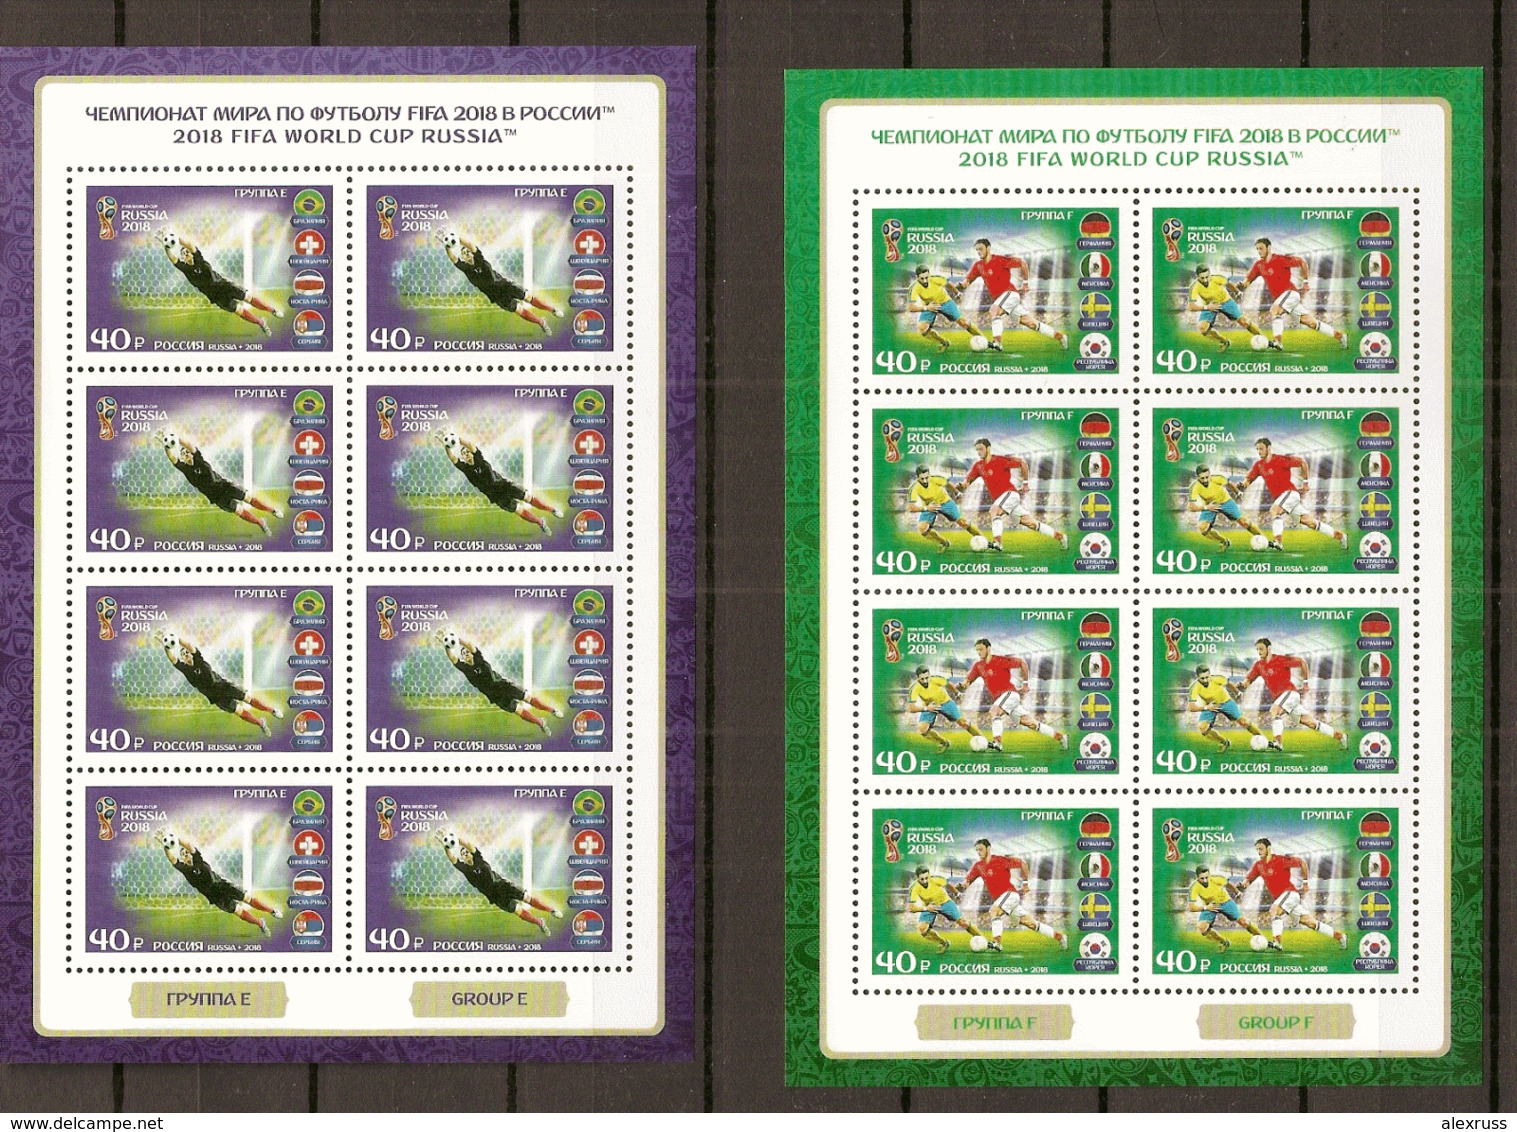 RUSSIA 2018,Complete Series 8 Full Sheets,FIFA World Cup Russia 2018,Participating Teams,XF MNH** - Hojas Completas